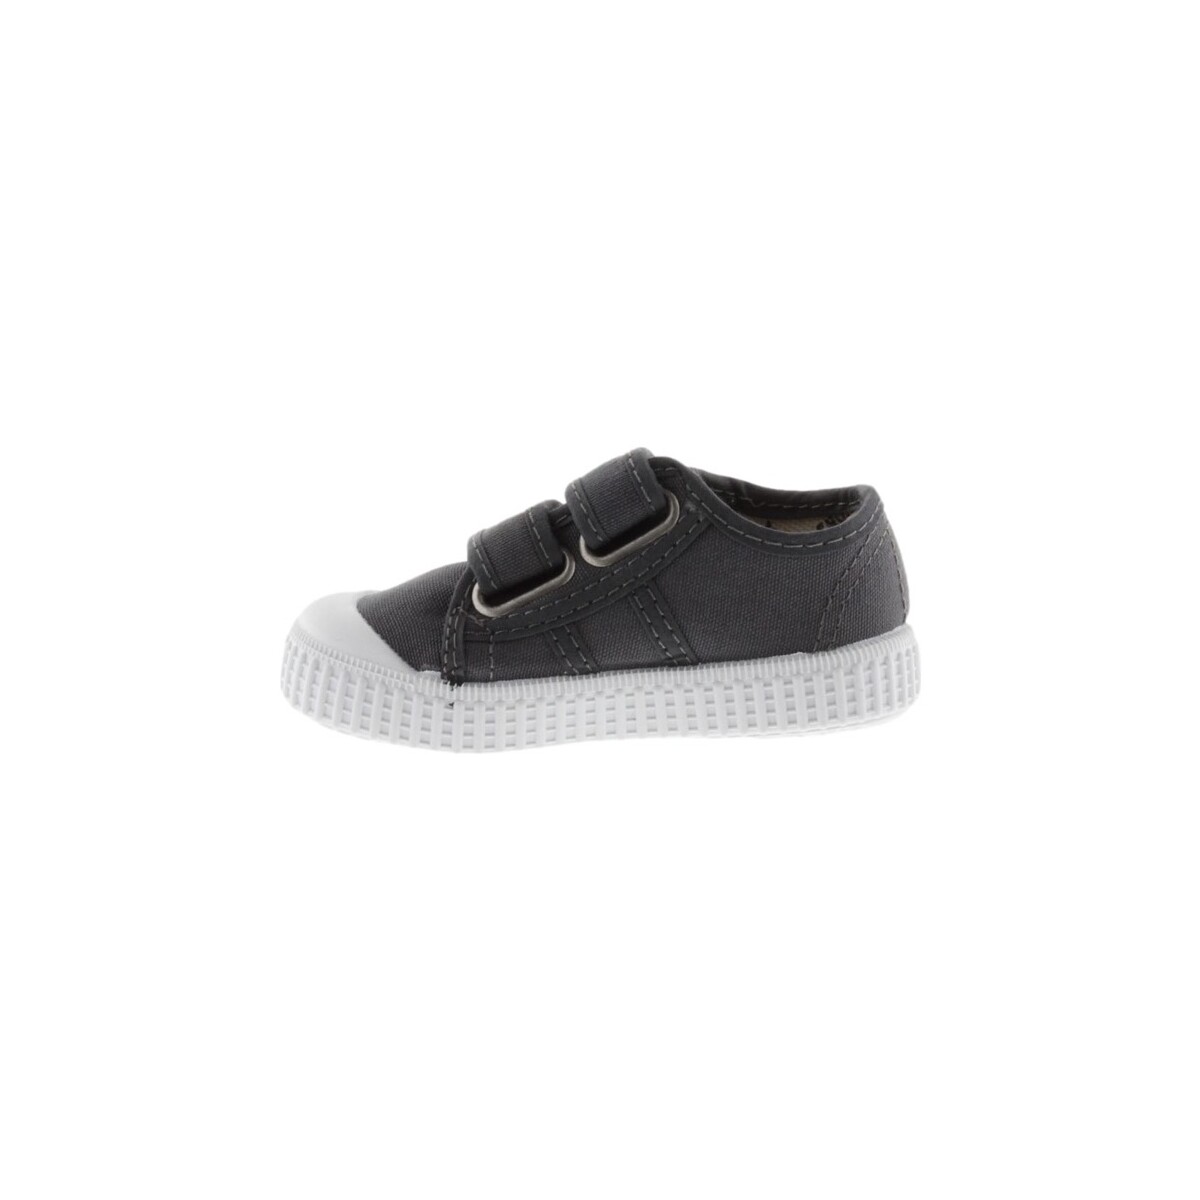 Victoria Gris Baby 36606 - Antracite 68Ma1heQ